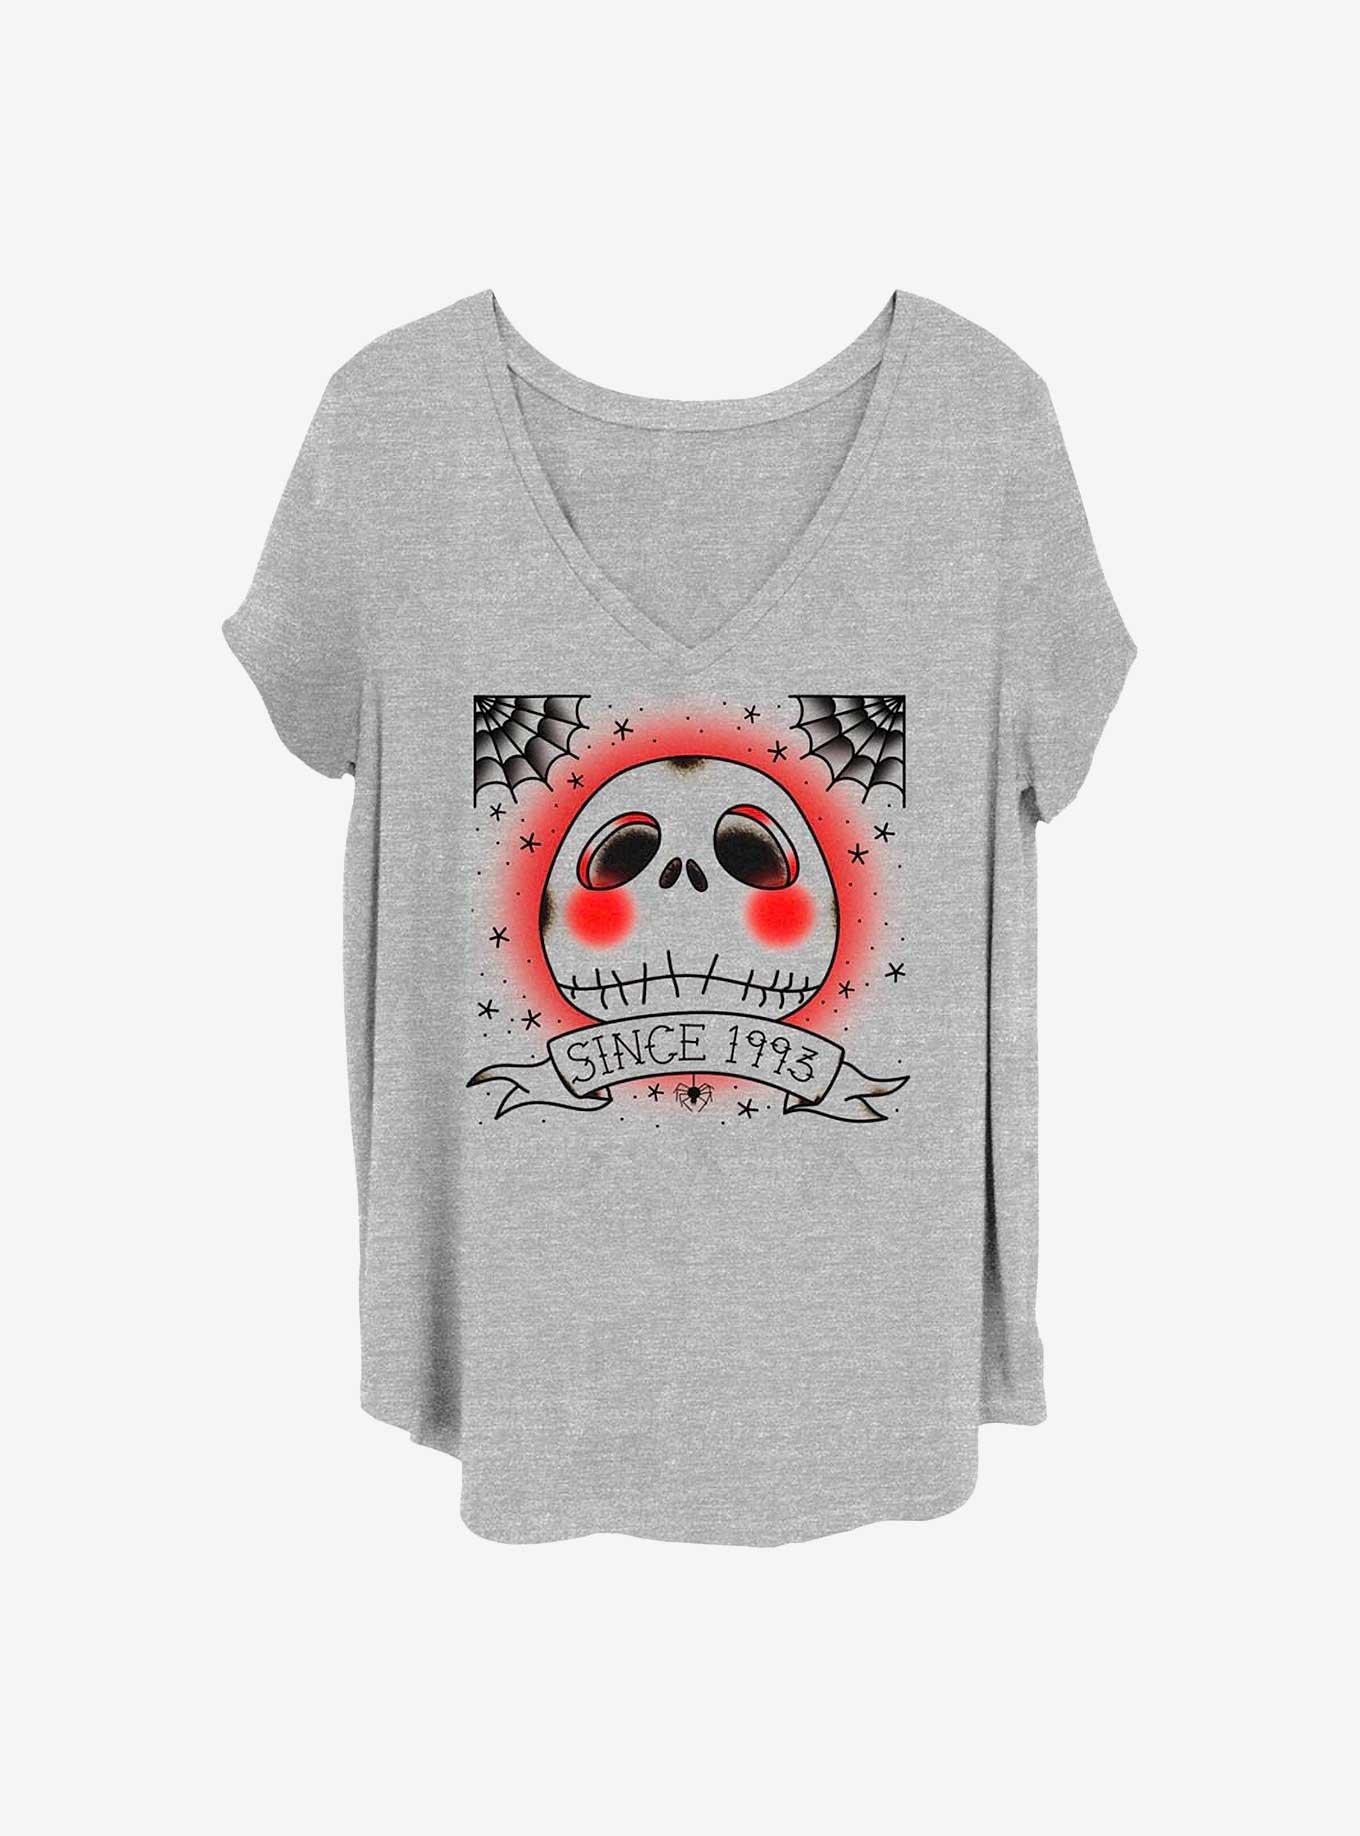 Disney The Nightmare Before Christmas Jack Since 1993 Girls T-Shirt Plus Size, HEATHER GR, hi-res